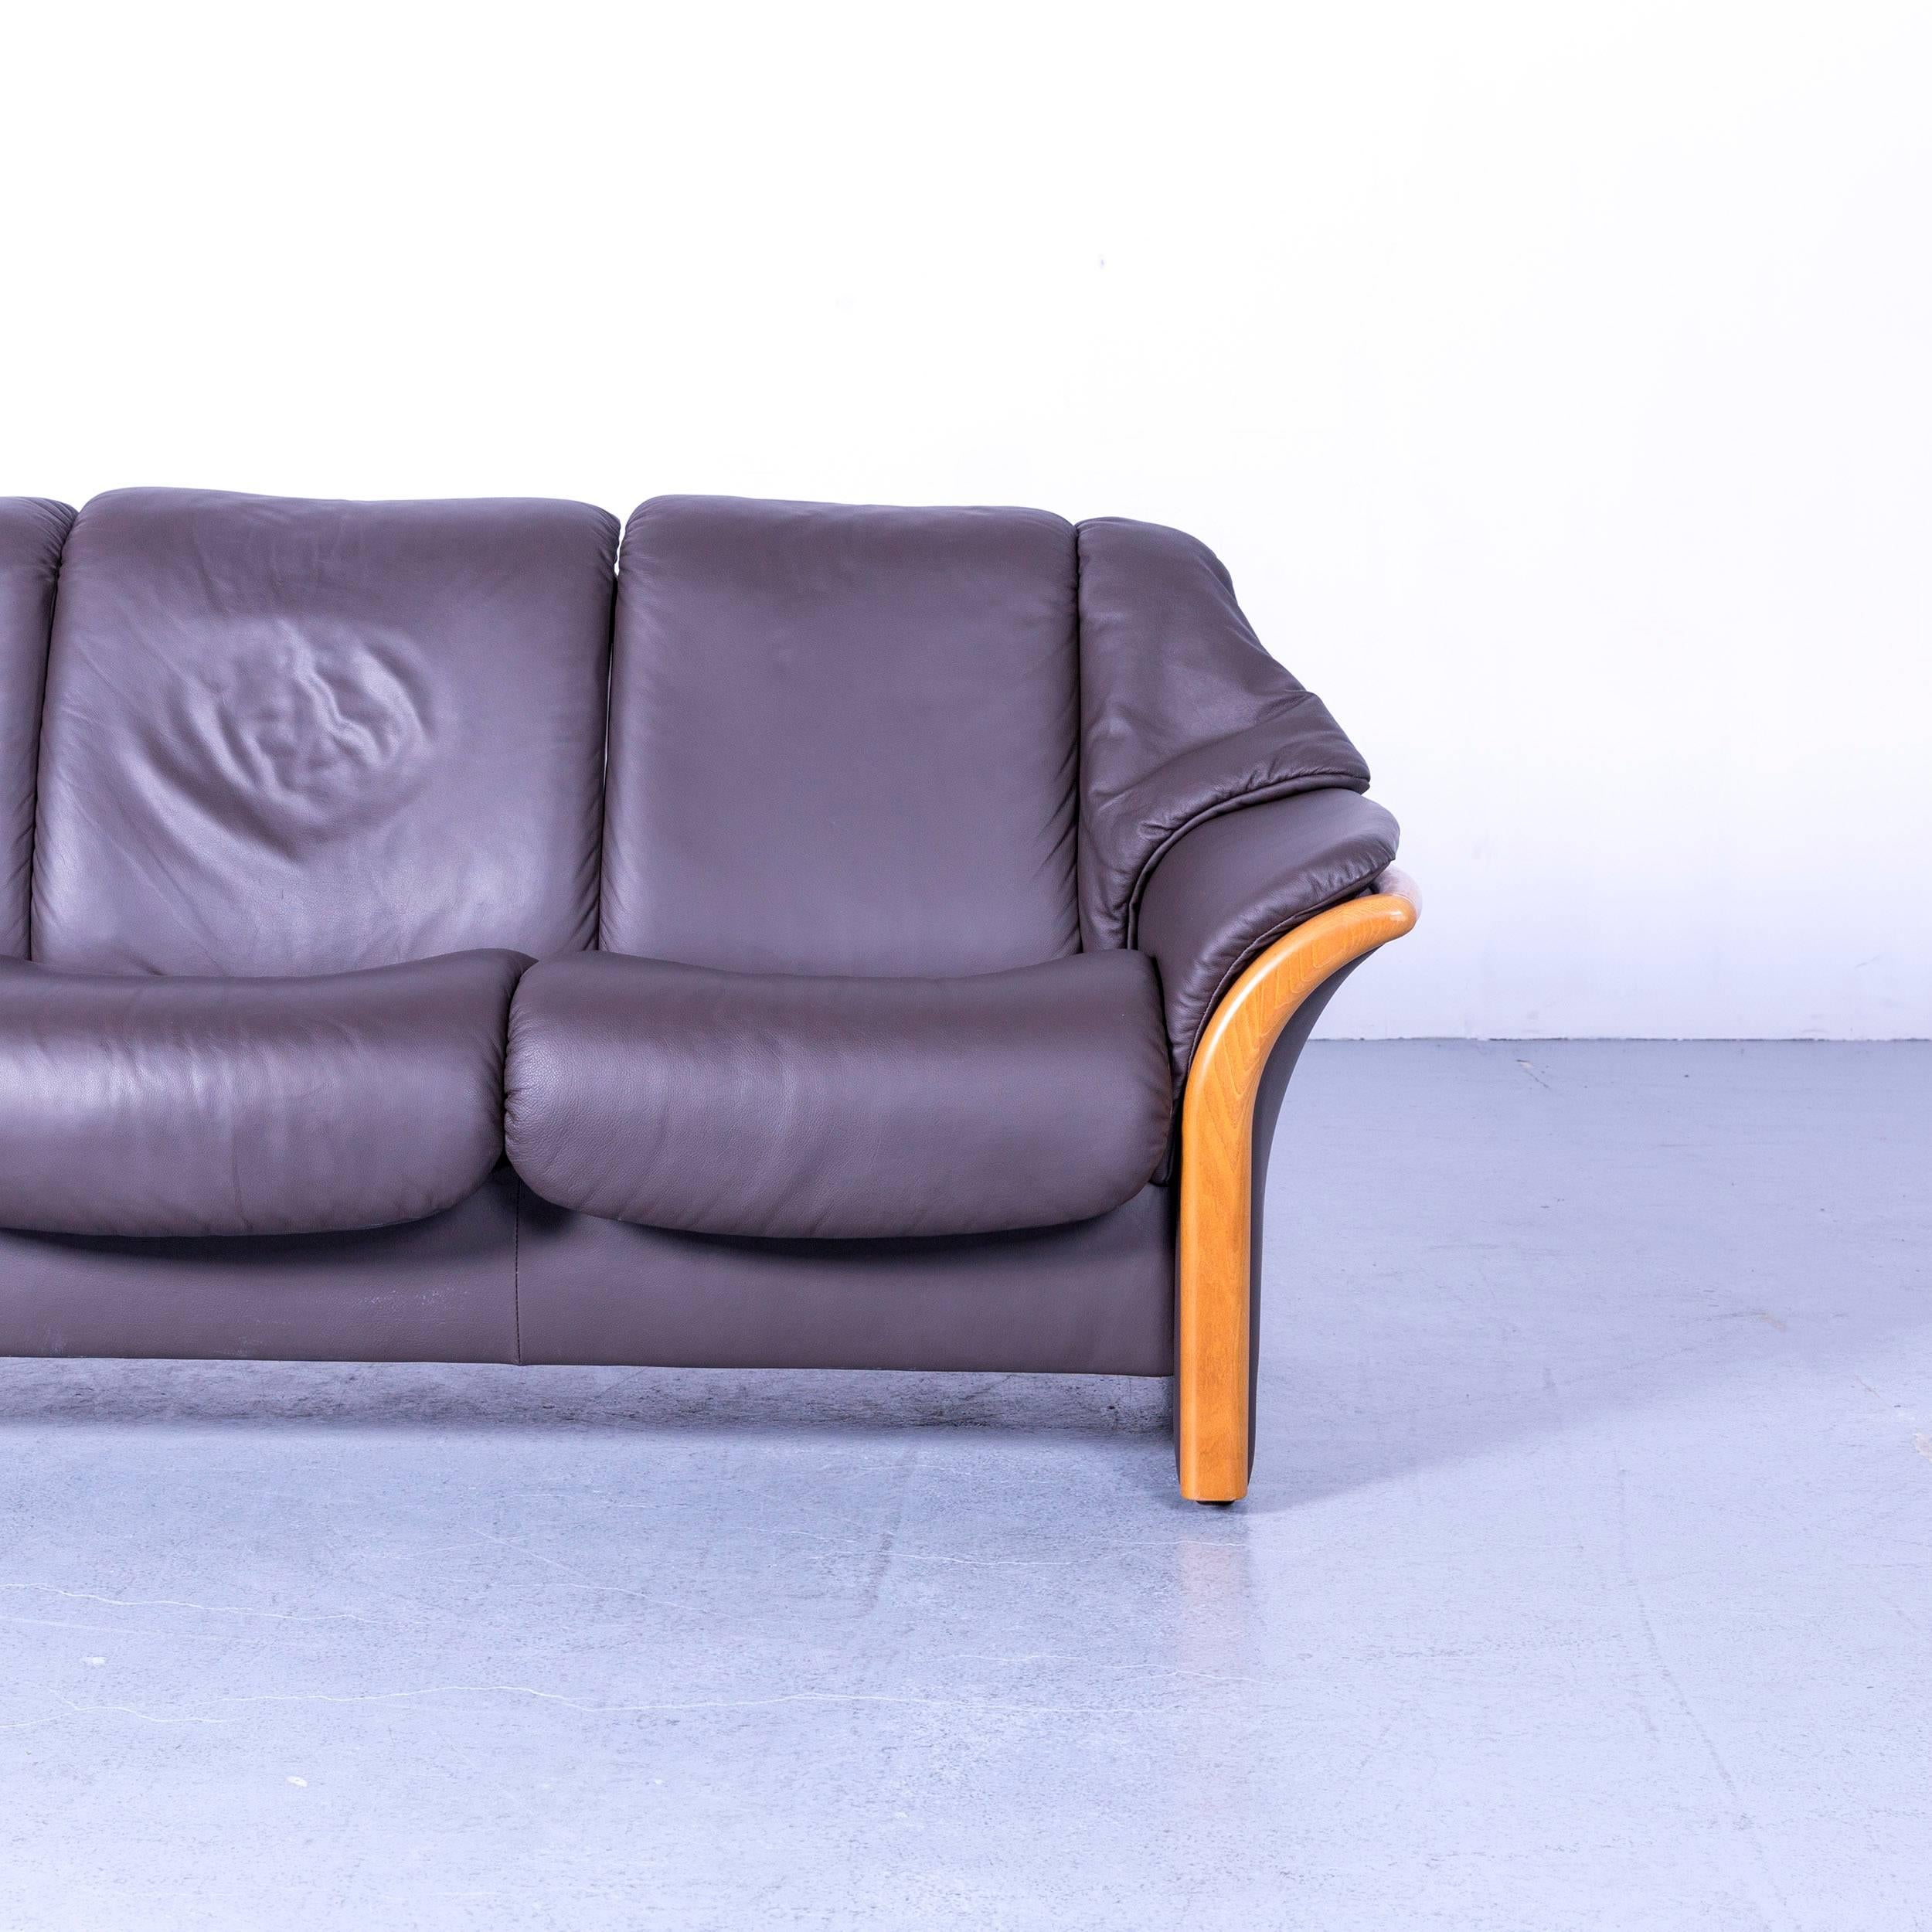 Ekornes Stressless Sofa Brown Leather Three-Seat In Good Condition For Sale In Cologne, DE